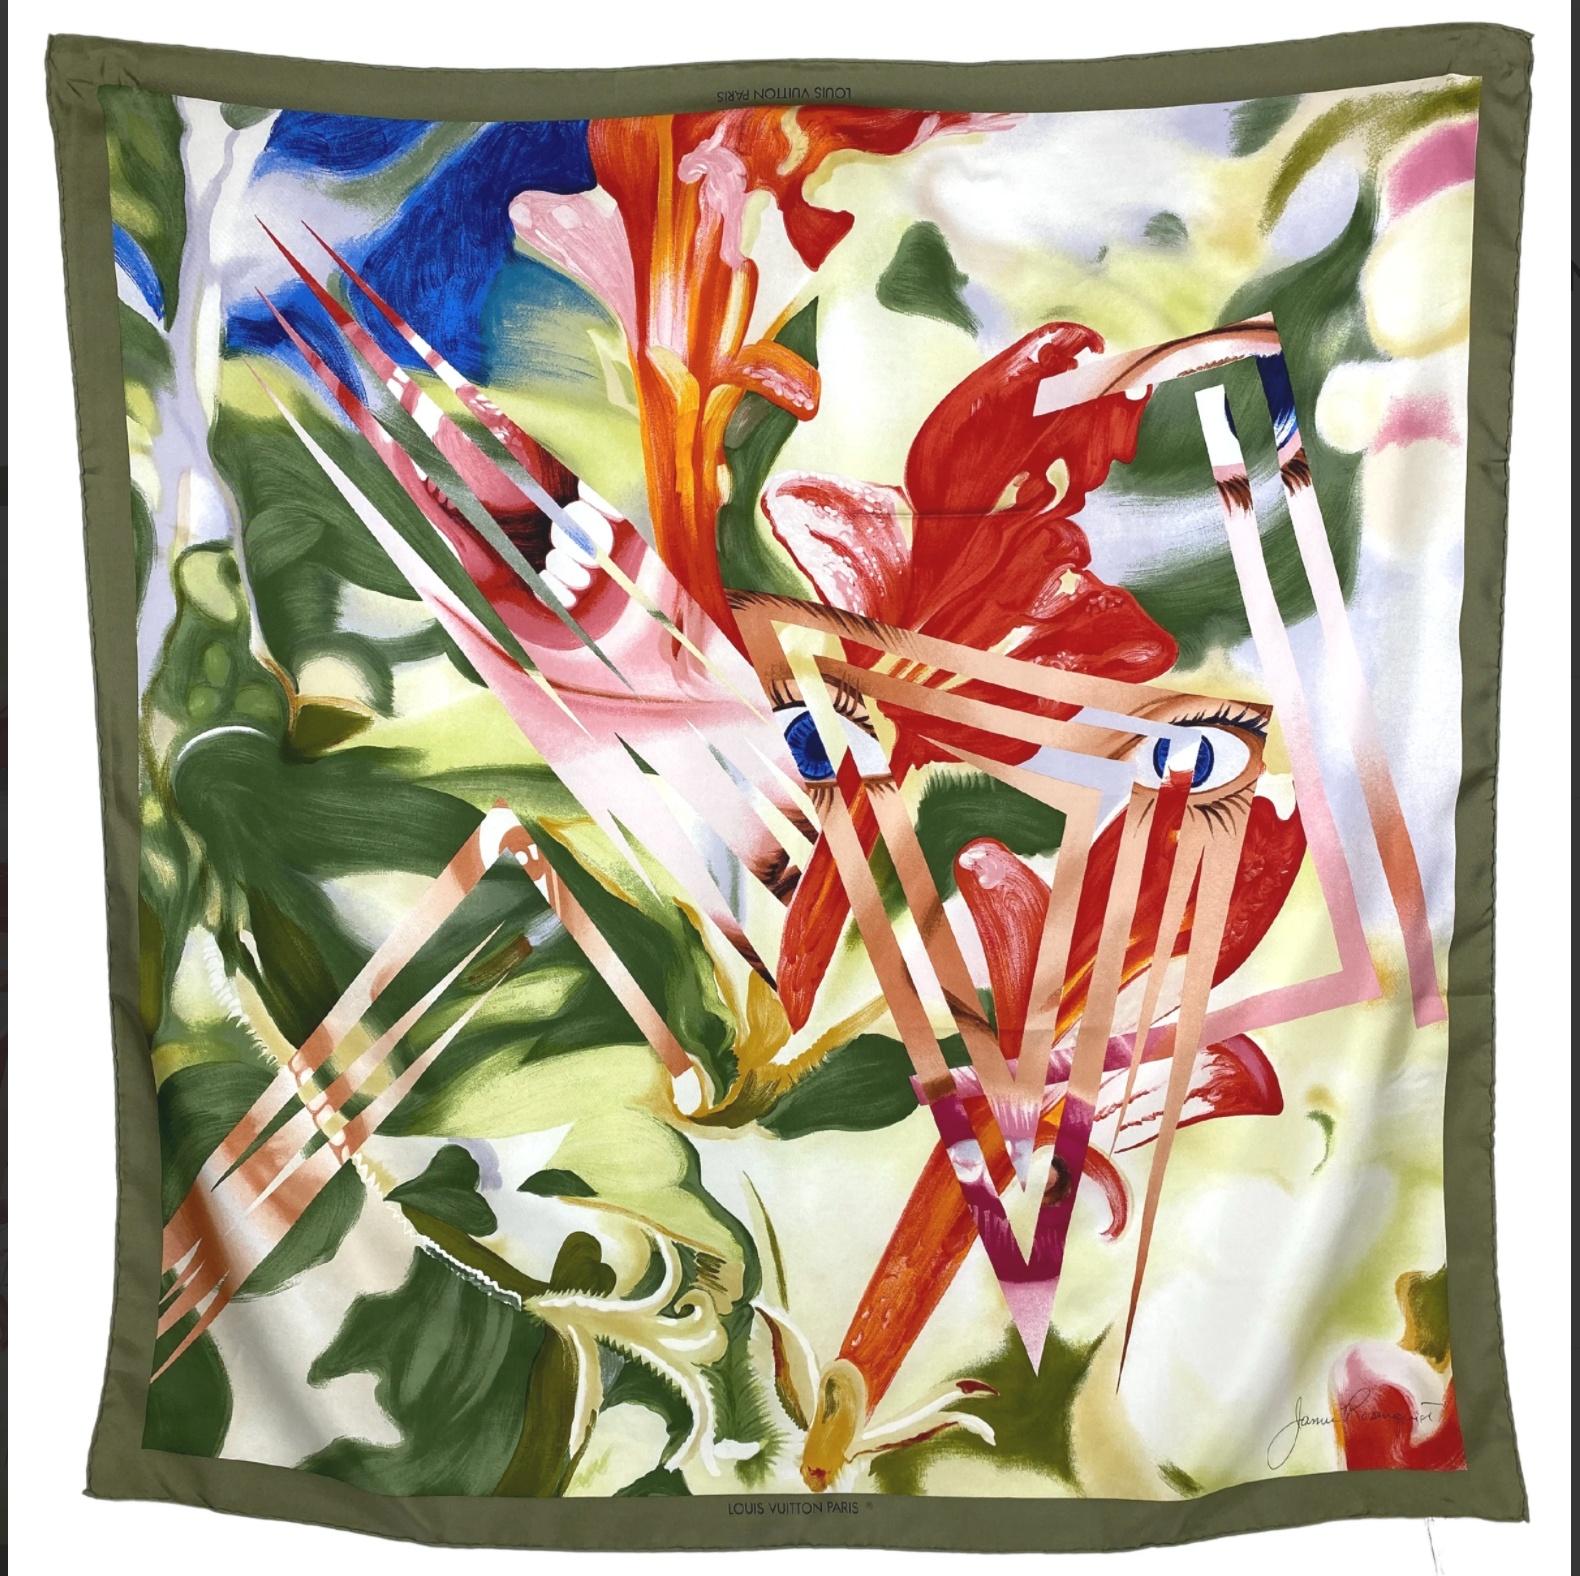  Louis Vuitton Limited Edition Silk Scarf designed by James Rosenquist